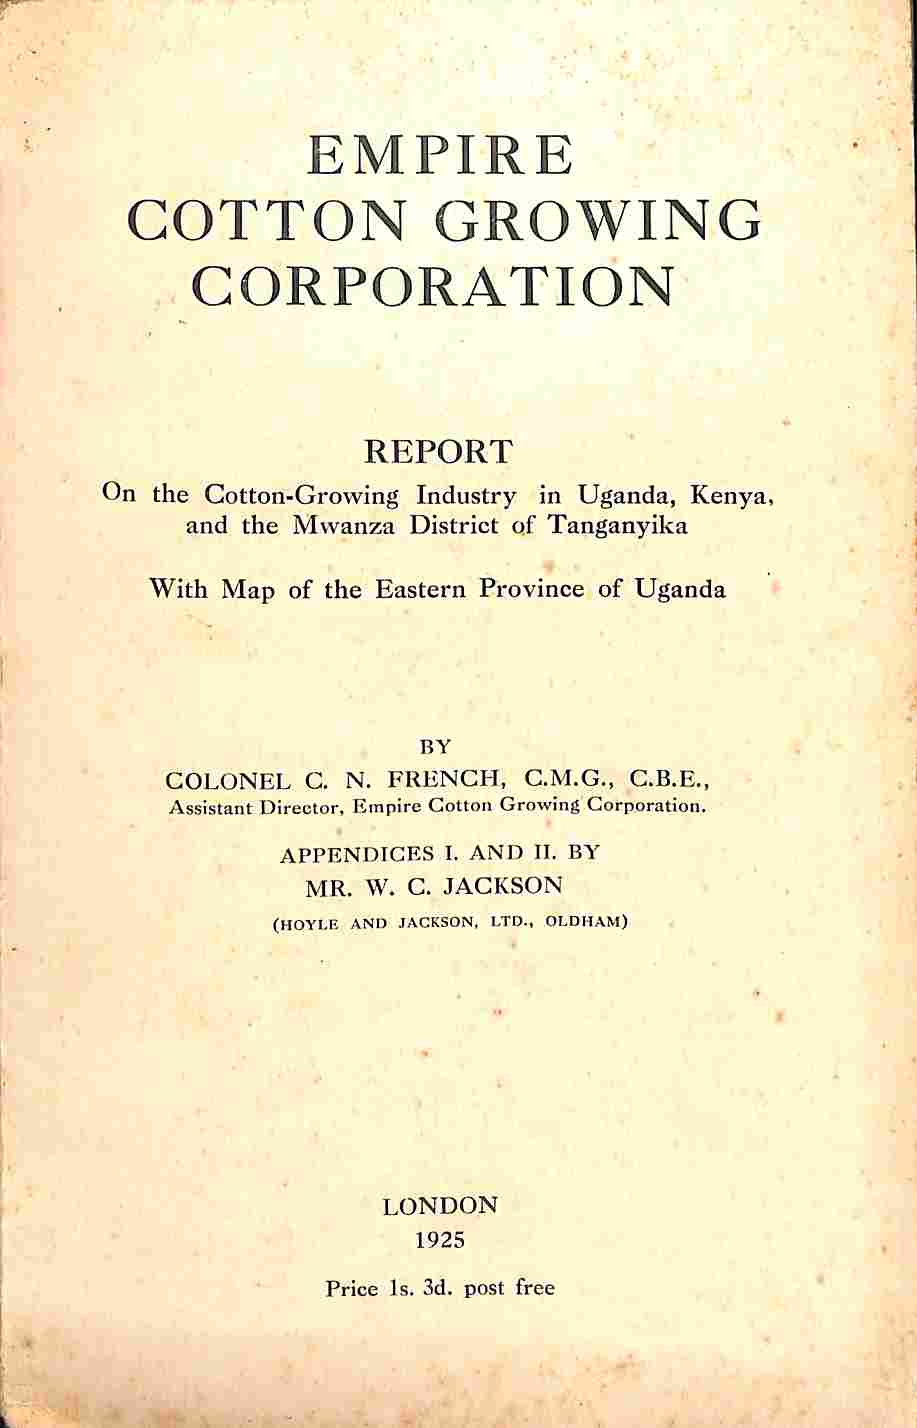 Empire Cotton Growing Corporation. Report on the Cotton-Growing Industry in Uganda, Kenya and the Mwanza District of Tanganyika